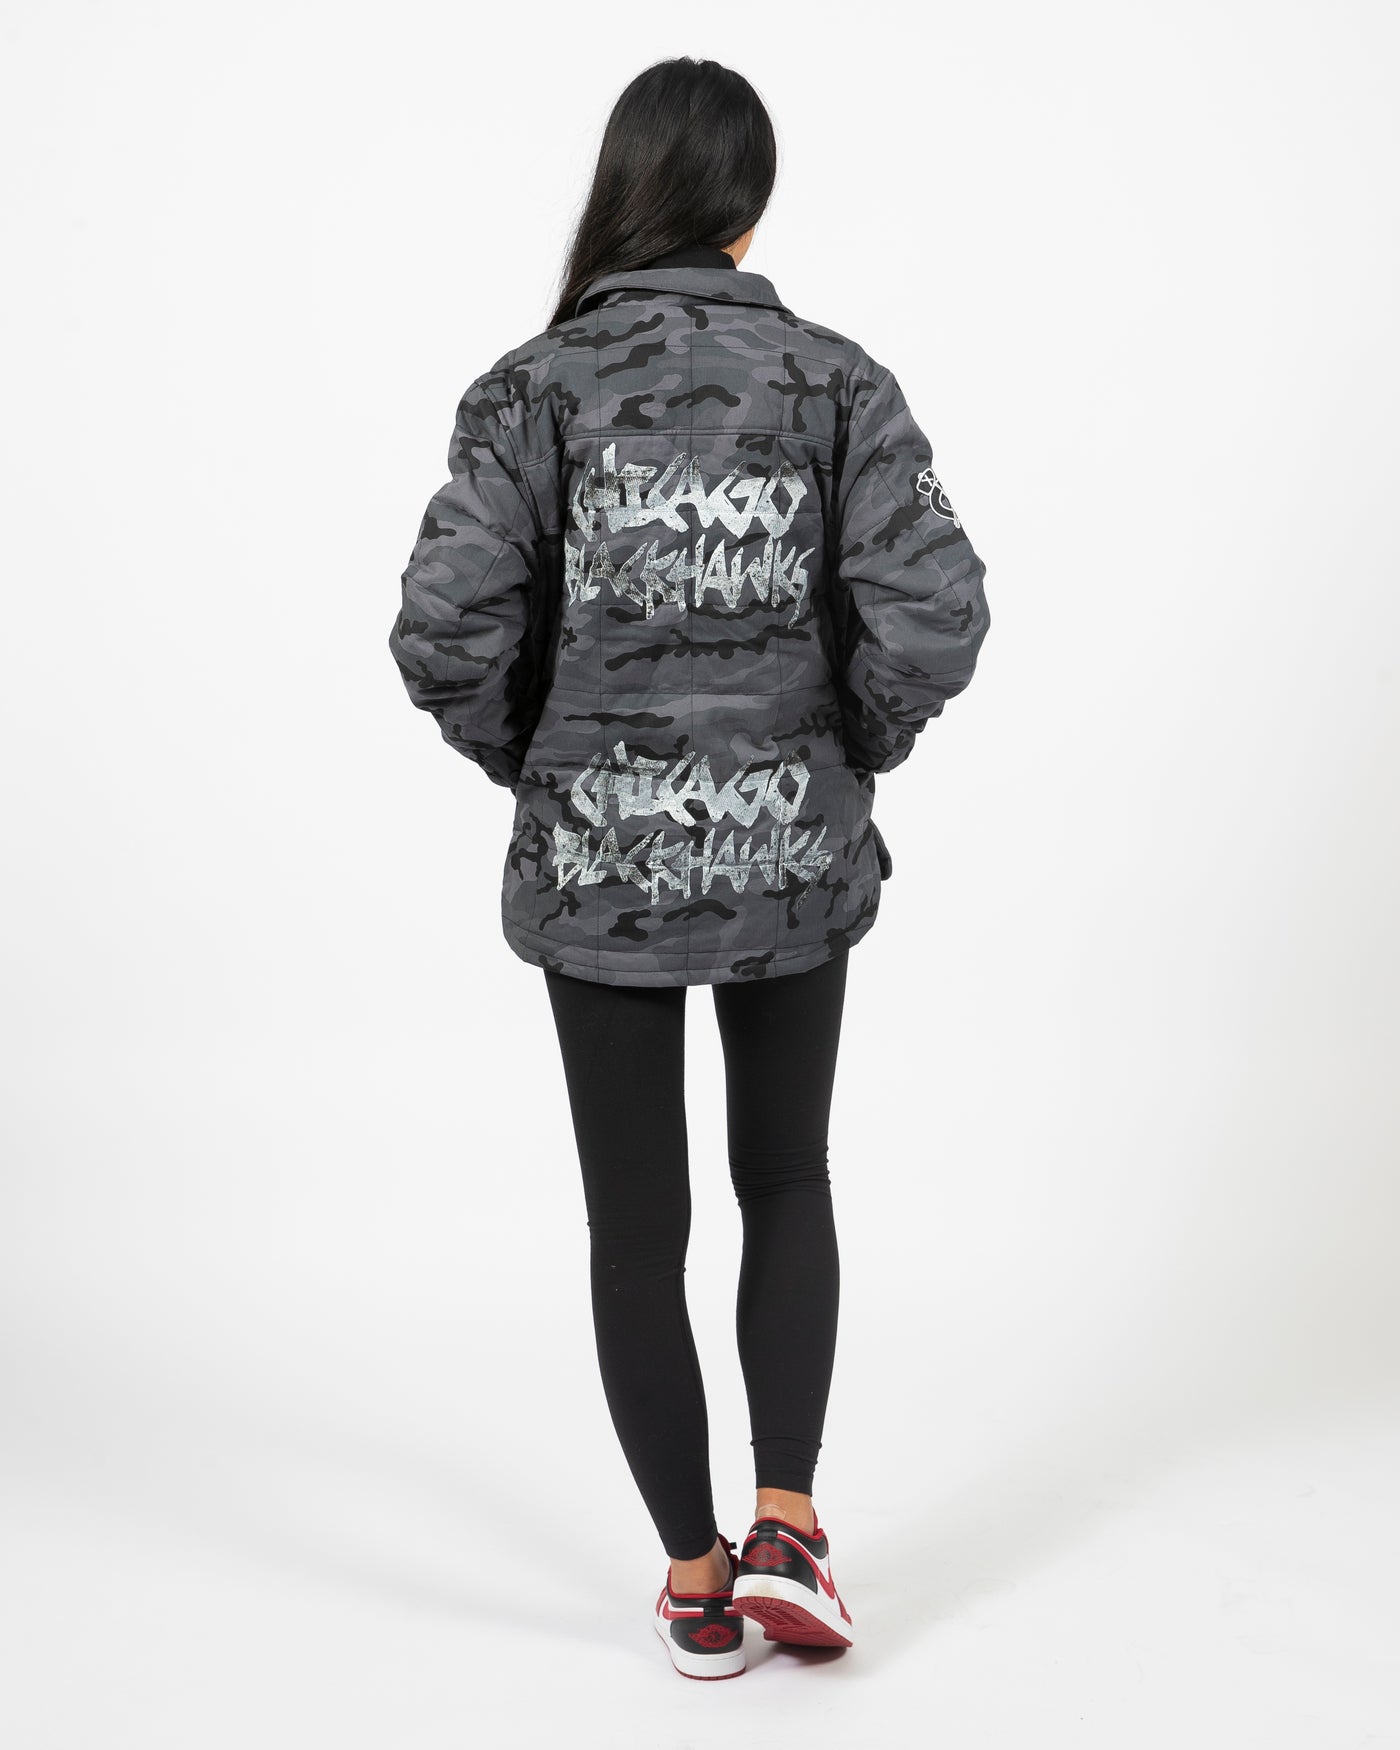 Wild Collective oversized camo print zip up jacket with Blackhawks primary logo and Chicago flag on front and Chicago Blackhawks on back - back view